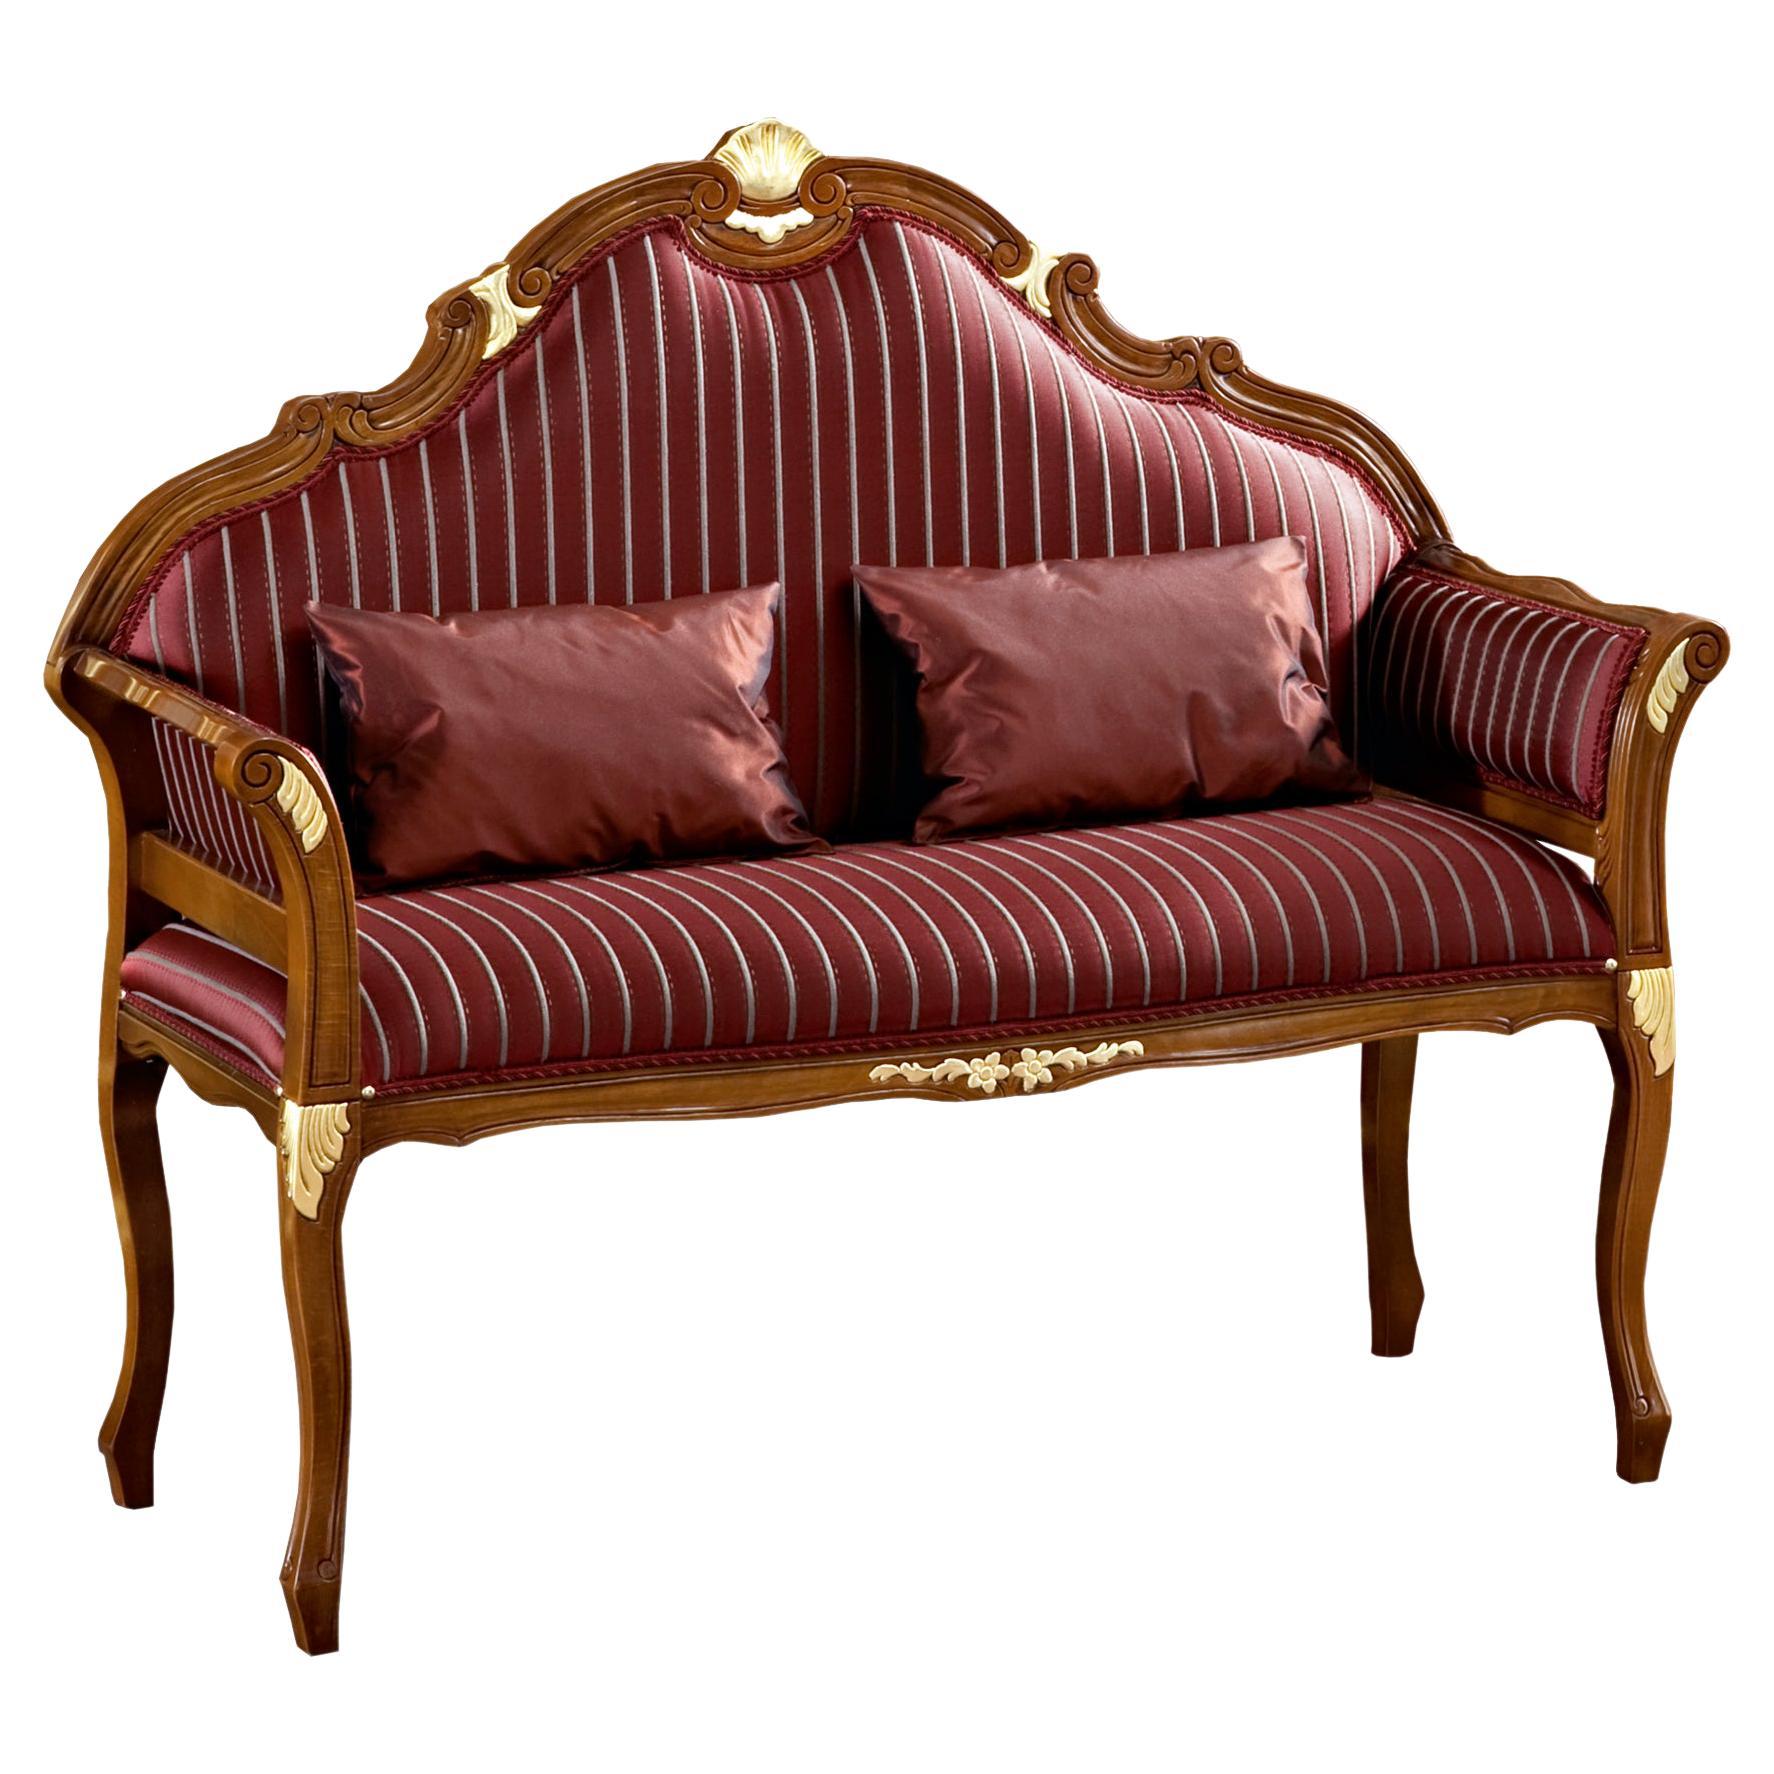 Red-Striped Rococo Loveseat with Gold Leaf by Modenese Interiors For Sale